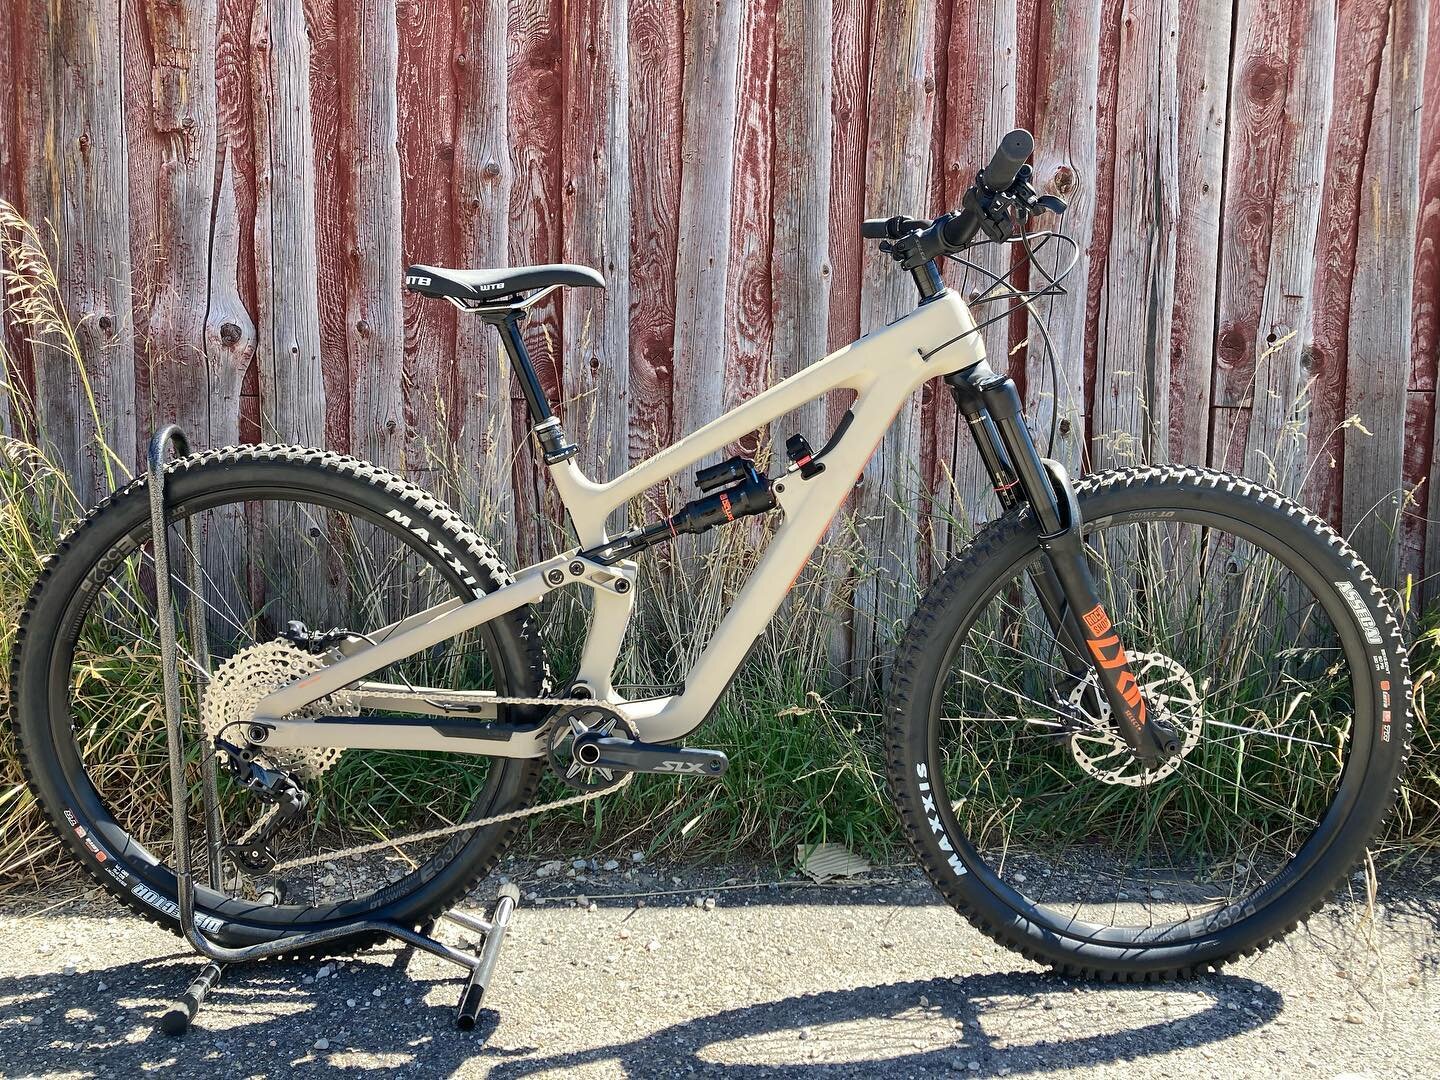 New stock!! 

The Salsa Blackthorn is your perfect long travel rugged all-mountain bike. We&rsquo;ve got a variety of sizes and colors - come take one for a spin! 

#salsacycles #salsainstock #salsablackthorn #fitzgeraldsbicycles #communitybikeshop #